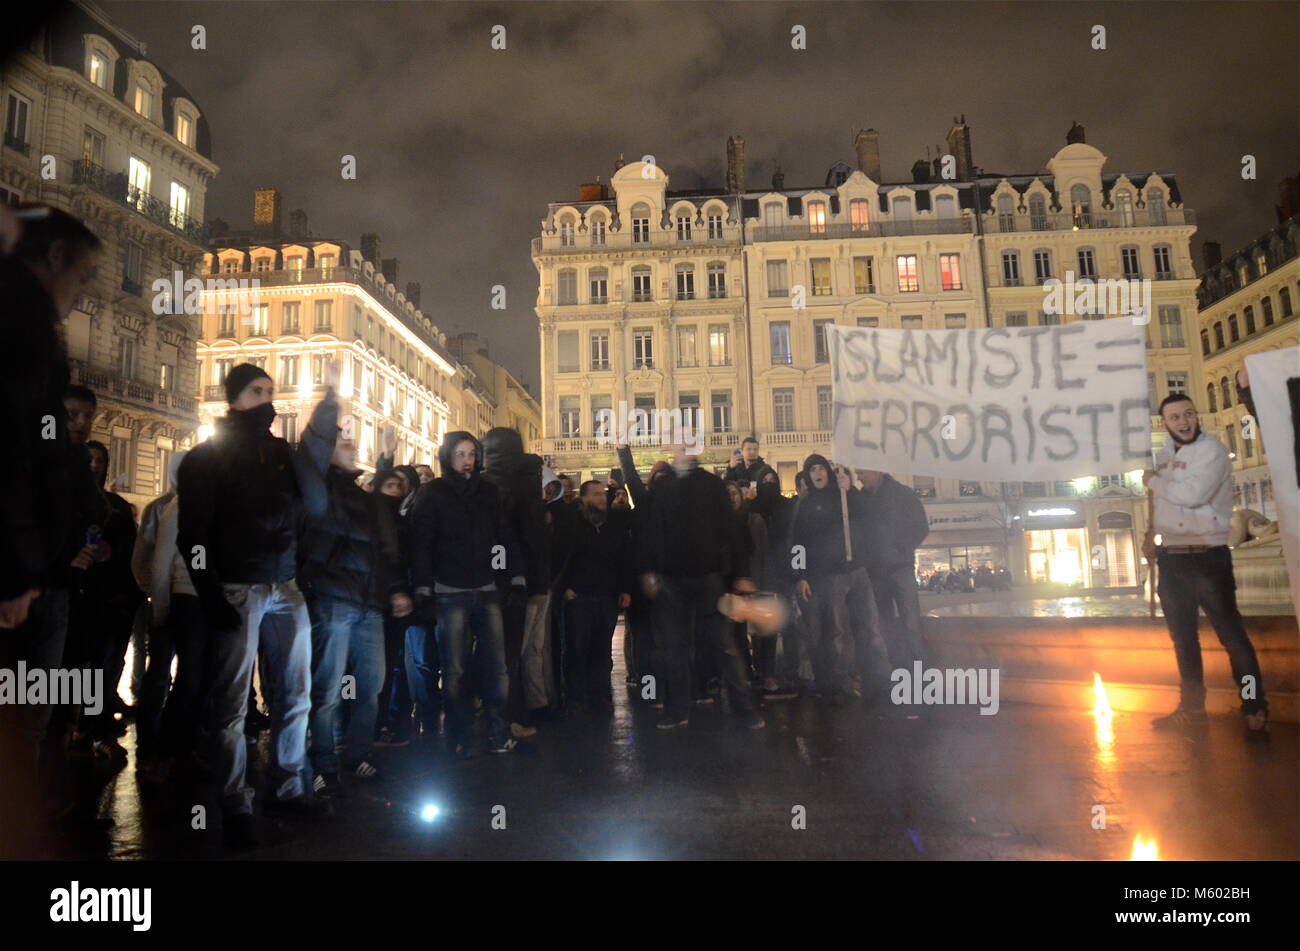 Far-right activists protest against supposed islamization of France, Lyon Stock Photo